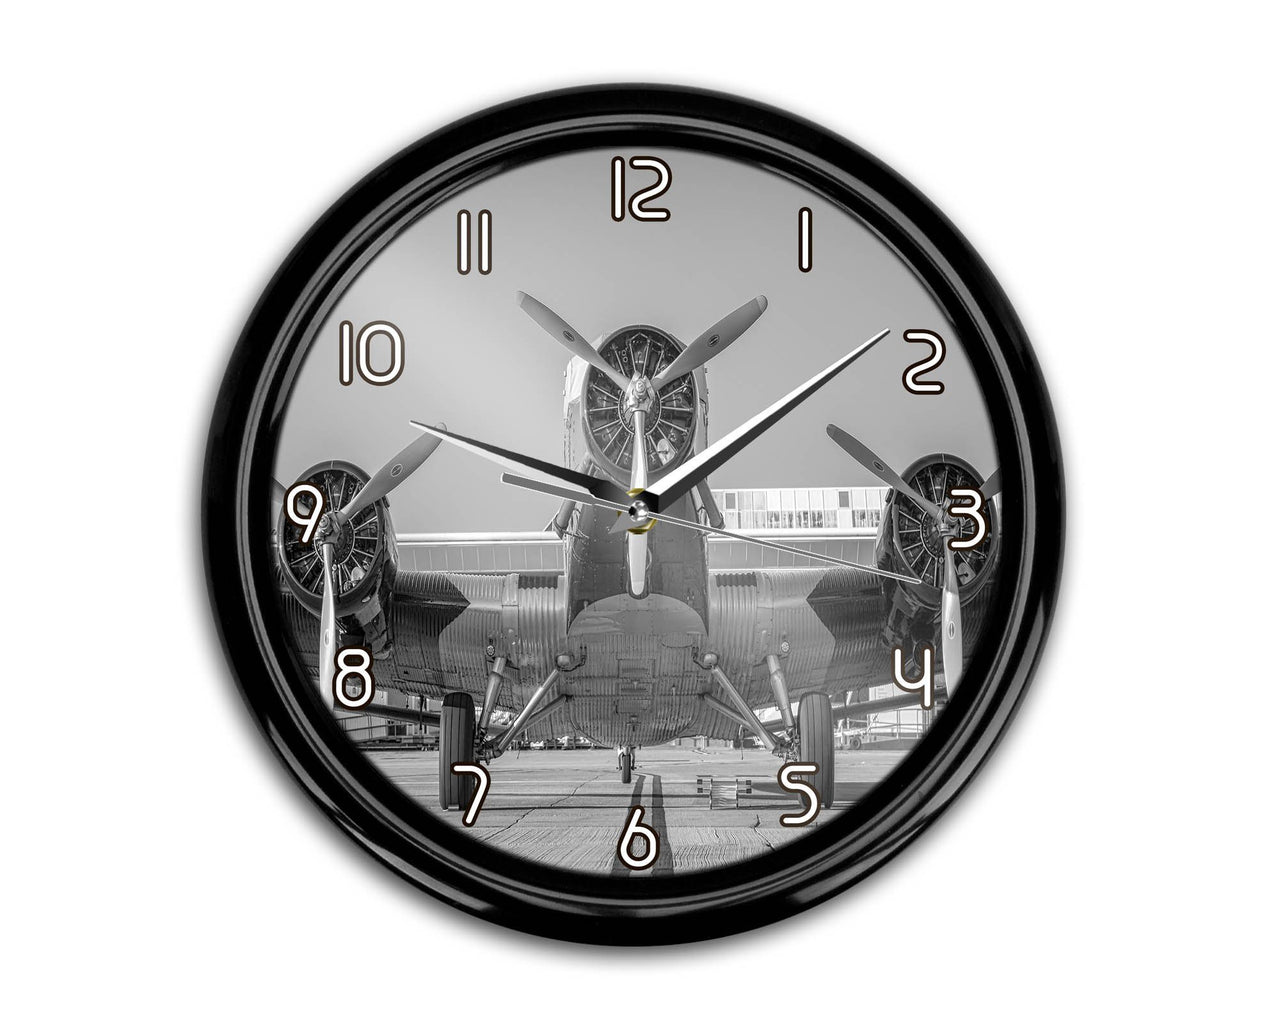 Face to Face to 3 Engine Old Airplane Printed Wall Clocks Aviation Shop 